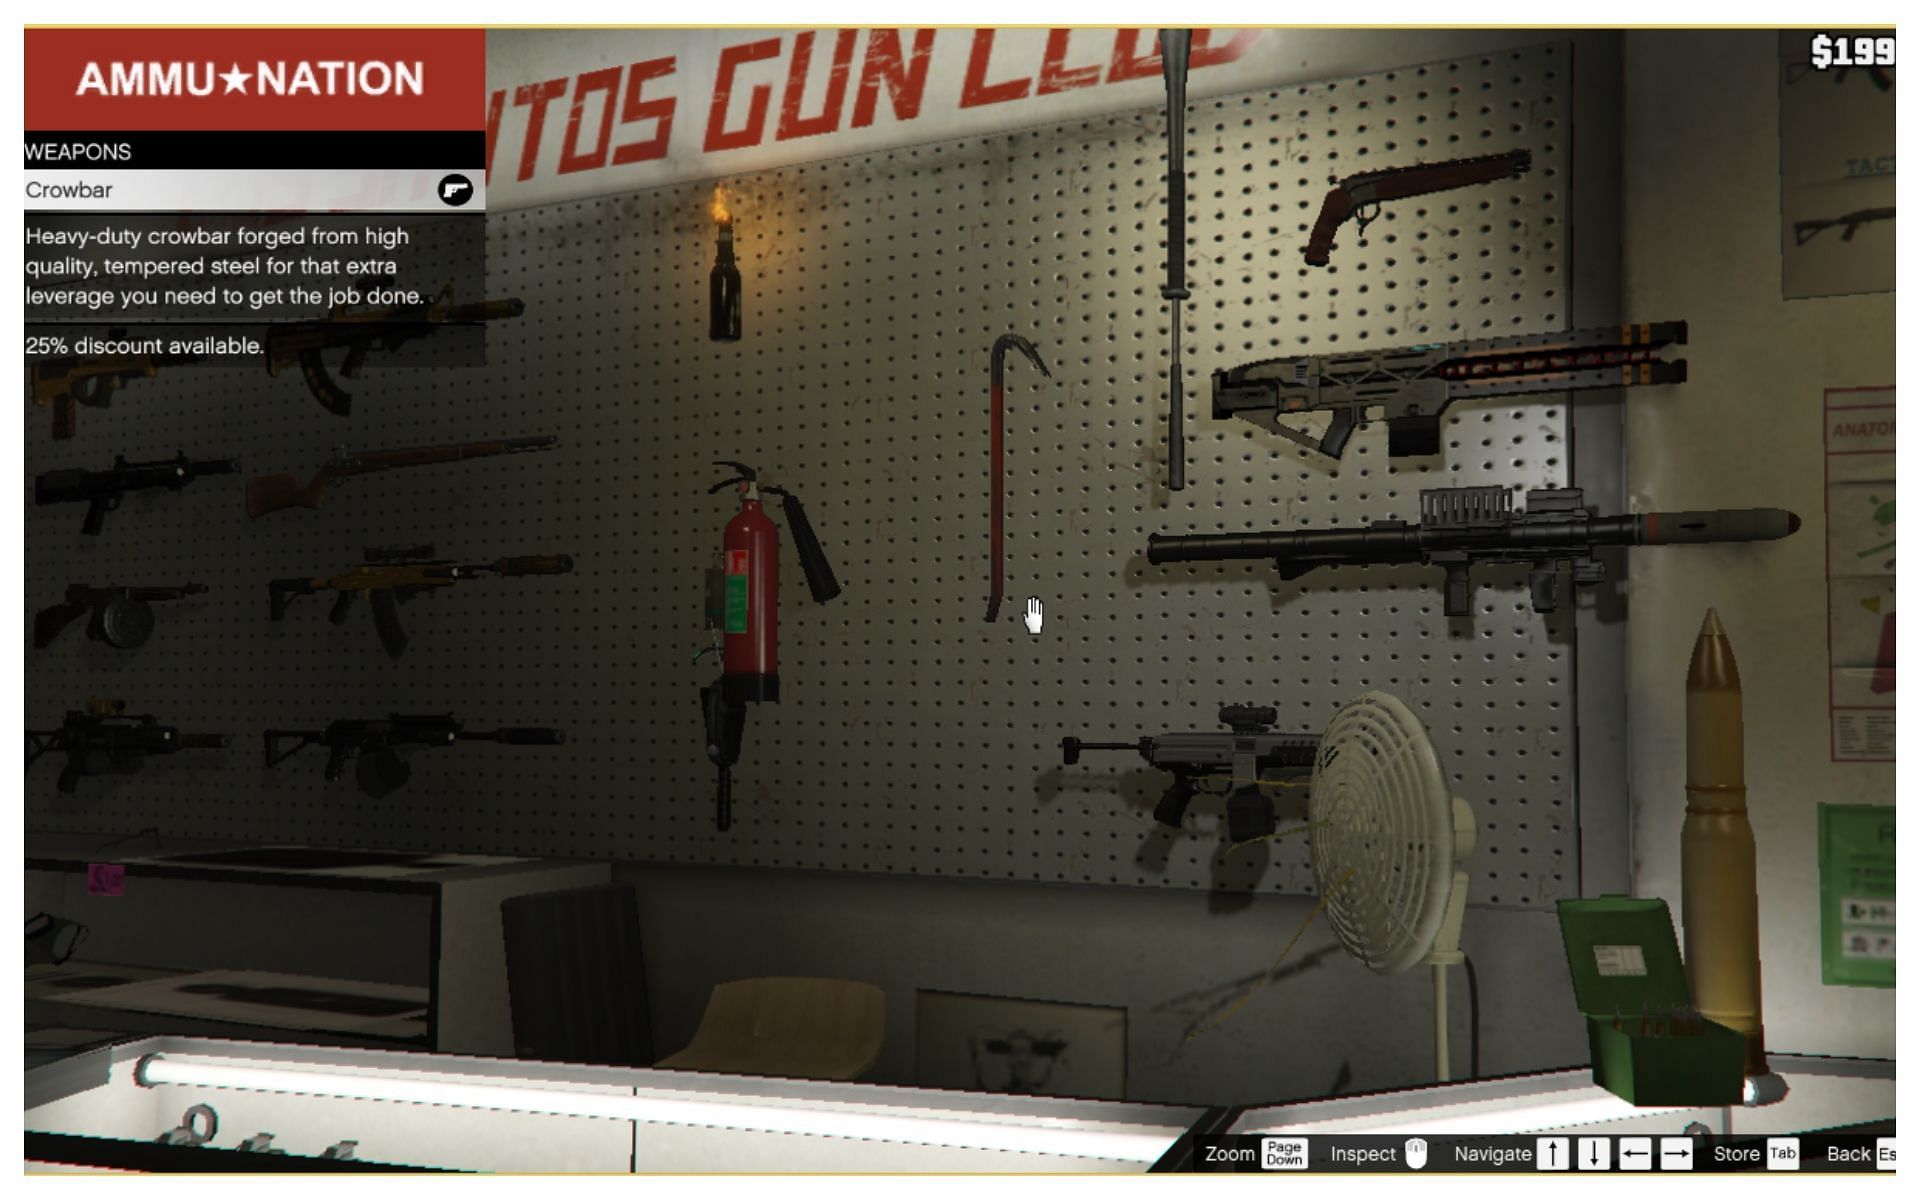 A few new weapons would have been great (Image via GTA 5 Modding)